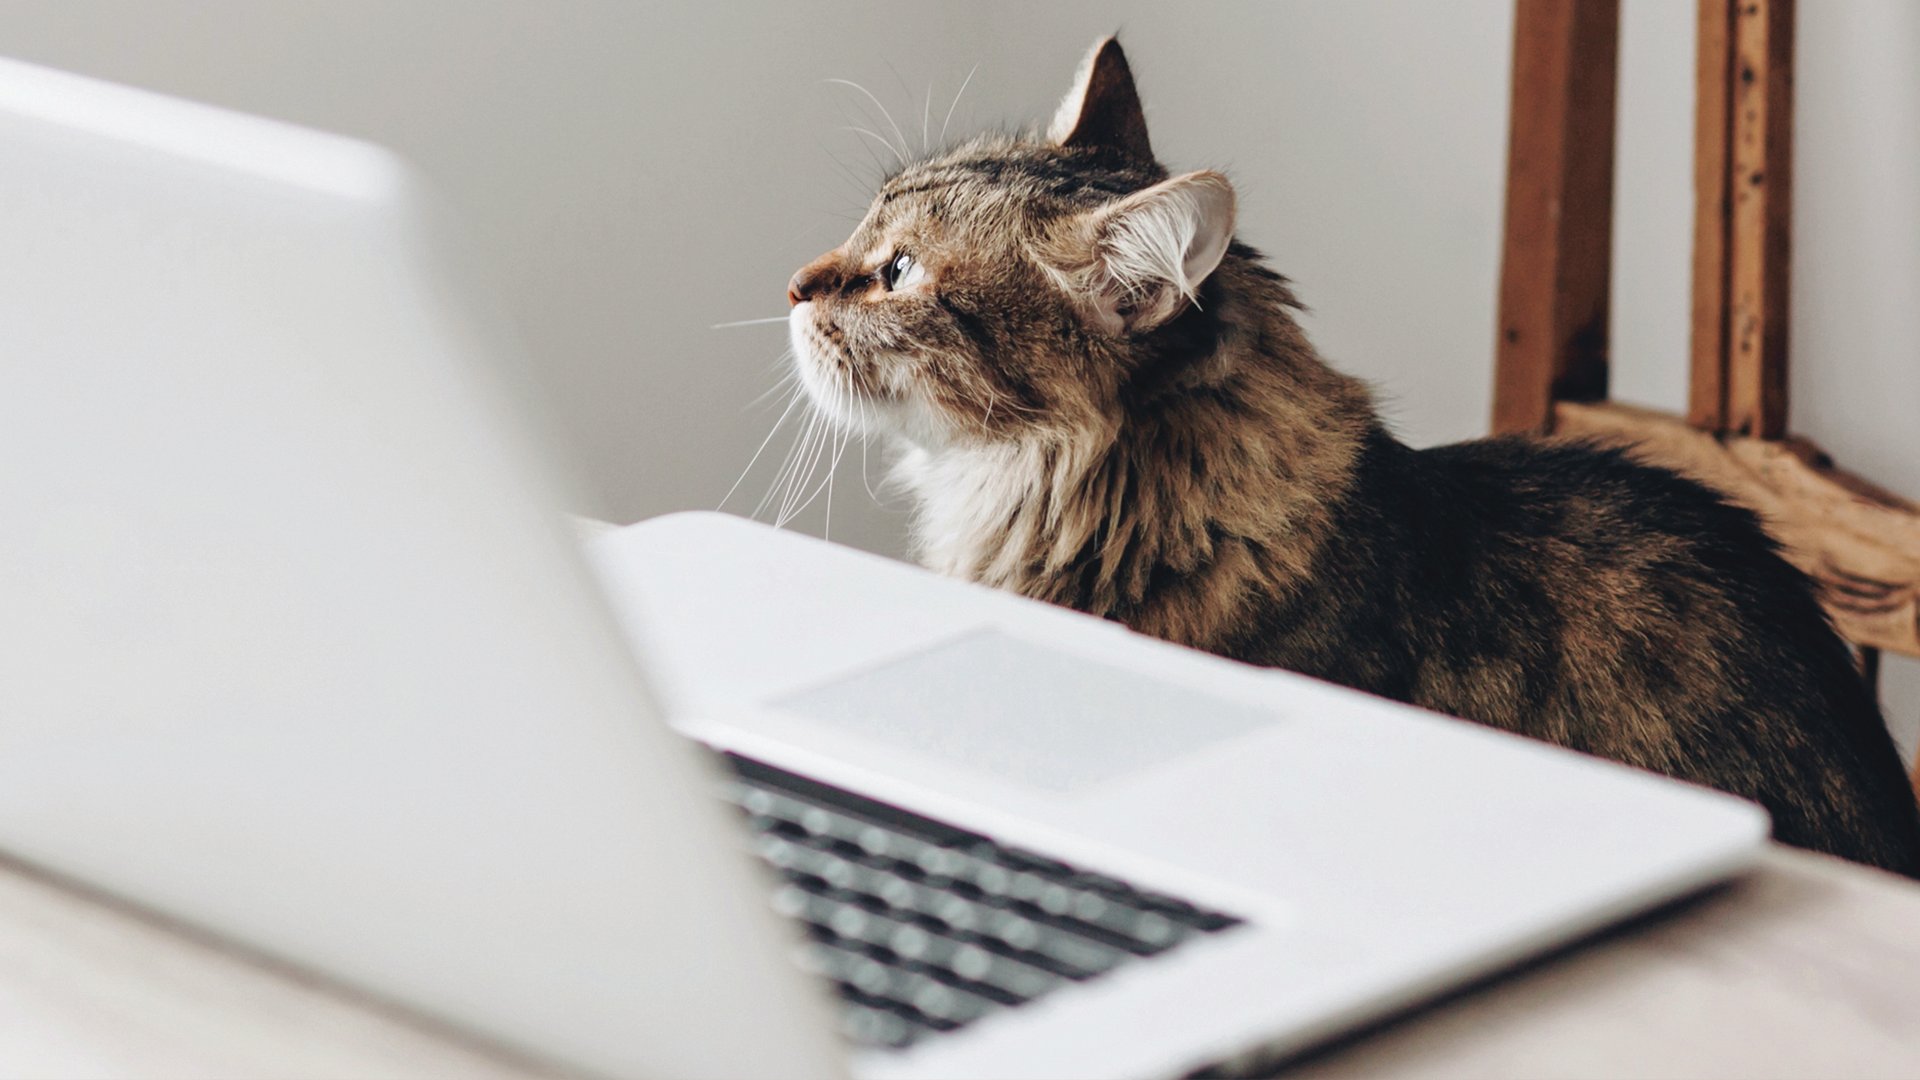 A cat at a desk with a laptop